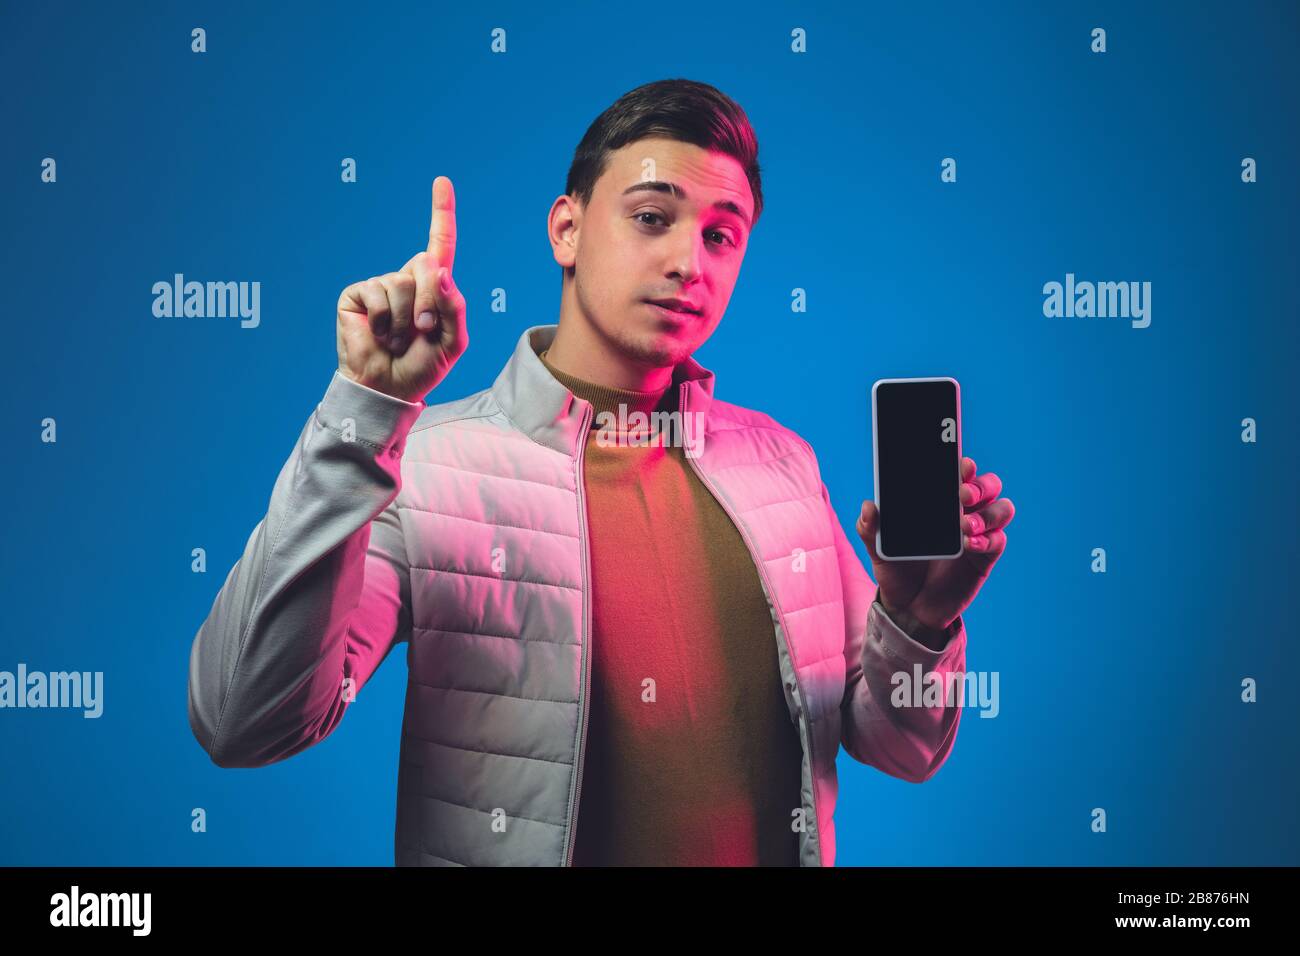 Showing blank phone screen Caucasian man's portrait on blue studio background in pink neon light. Beautiful male model in casual. Concept of human emotions, facial expression, sales, ad. Copyspace. Stock Photo